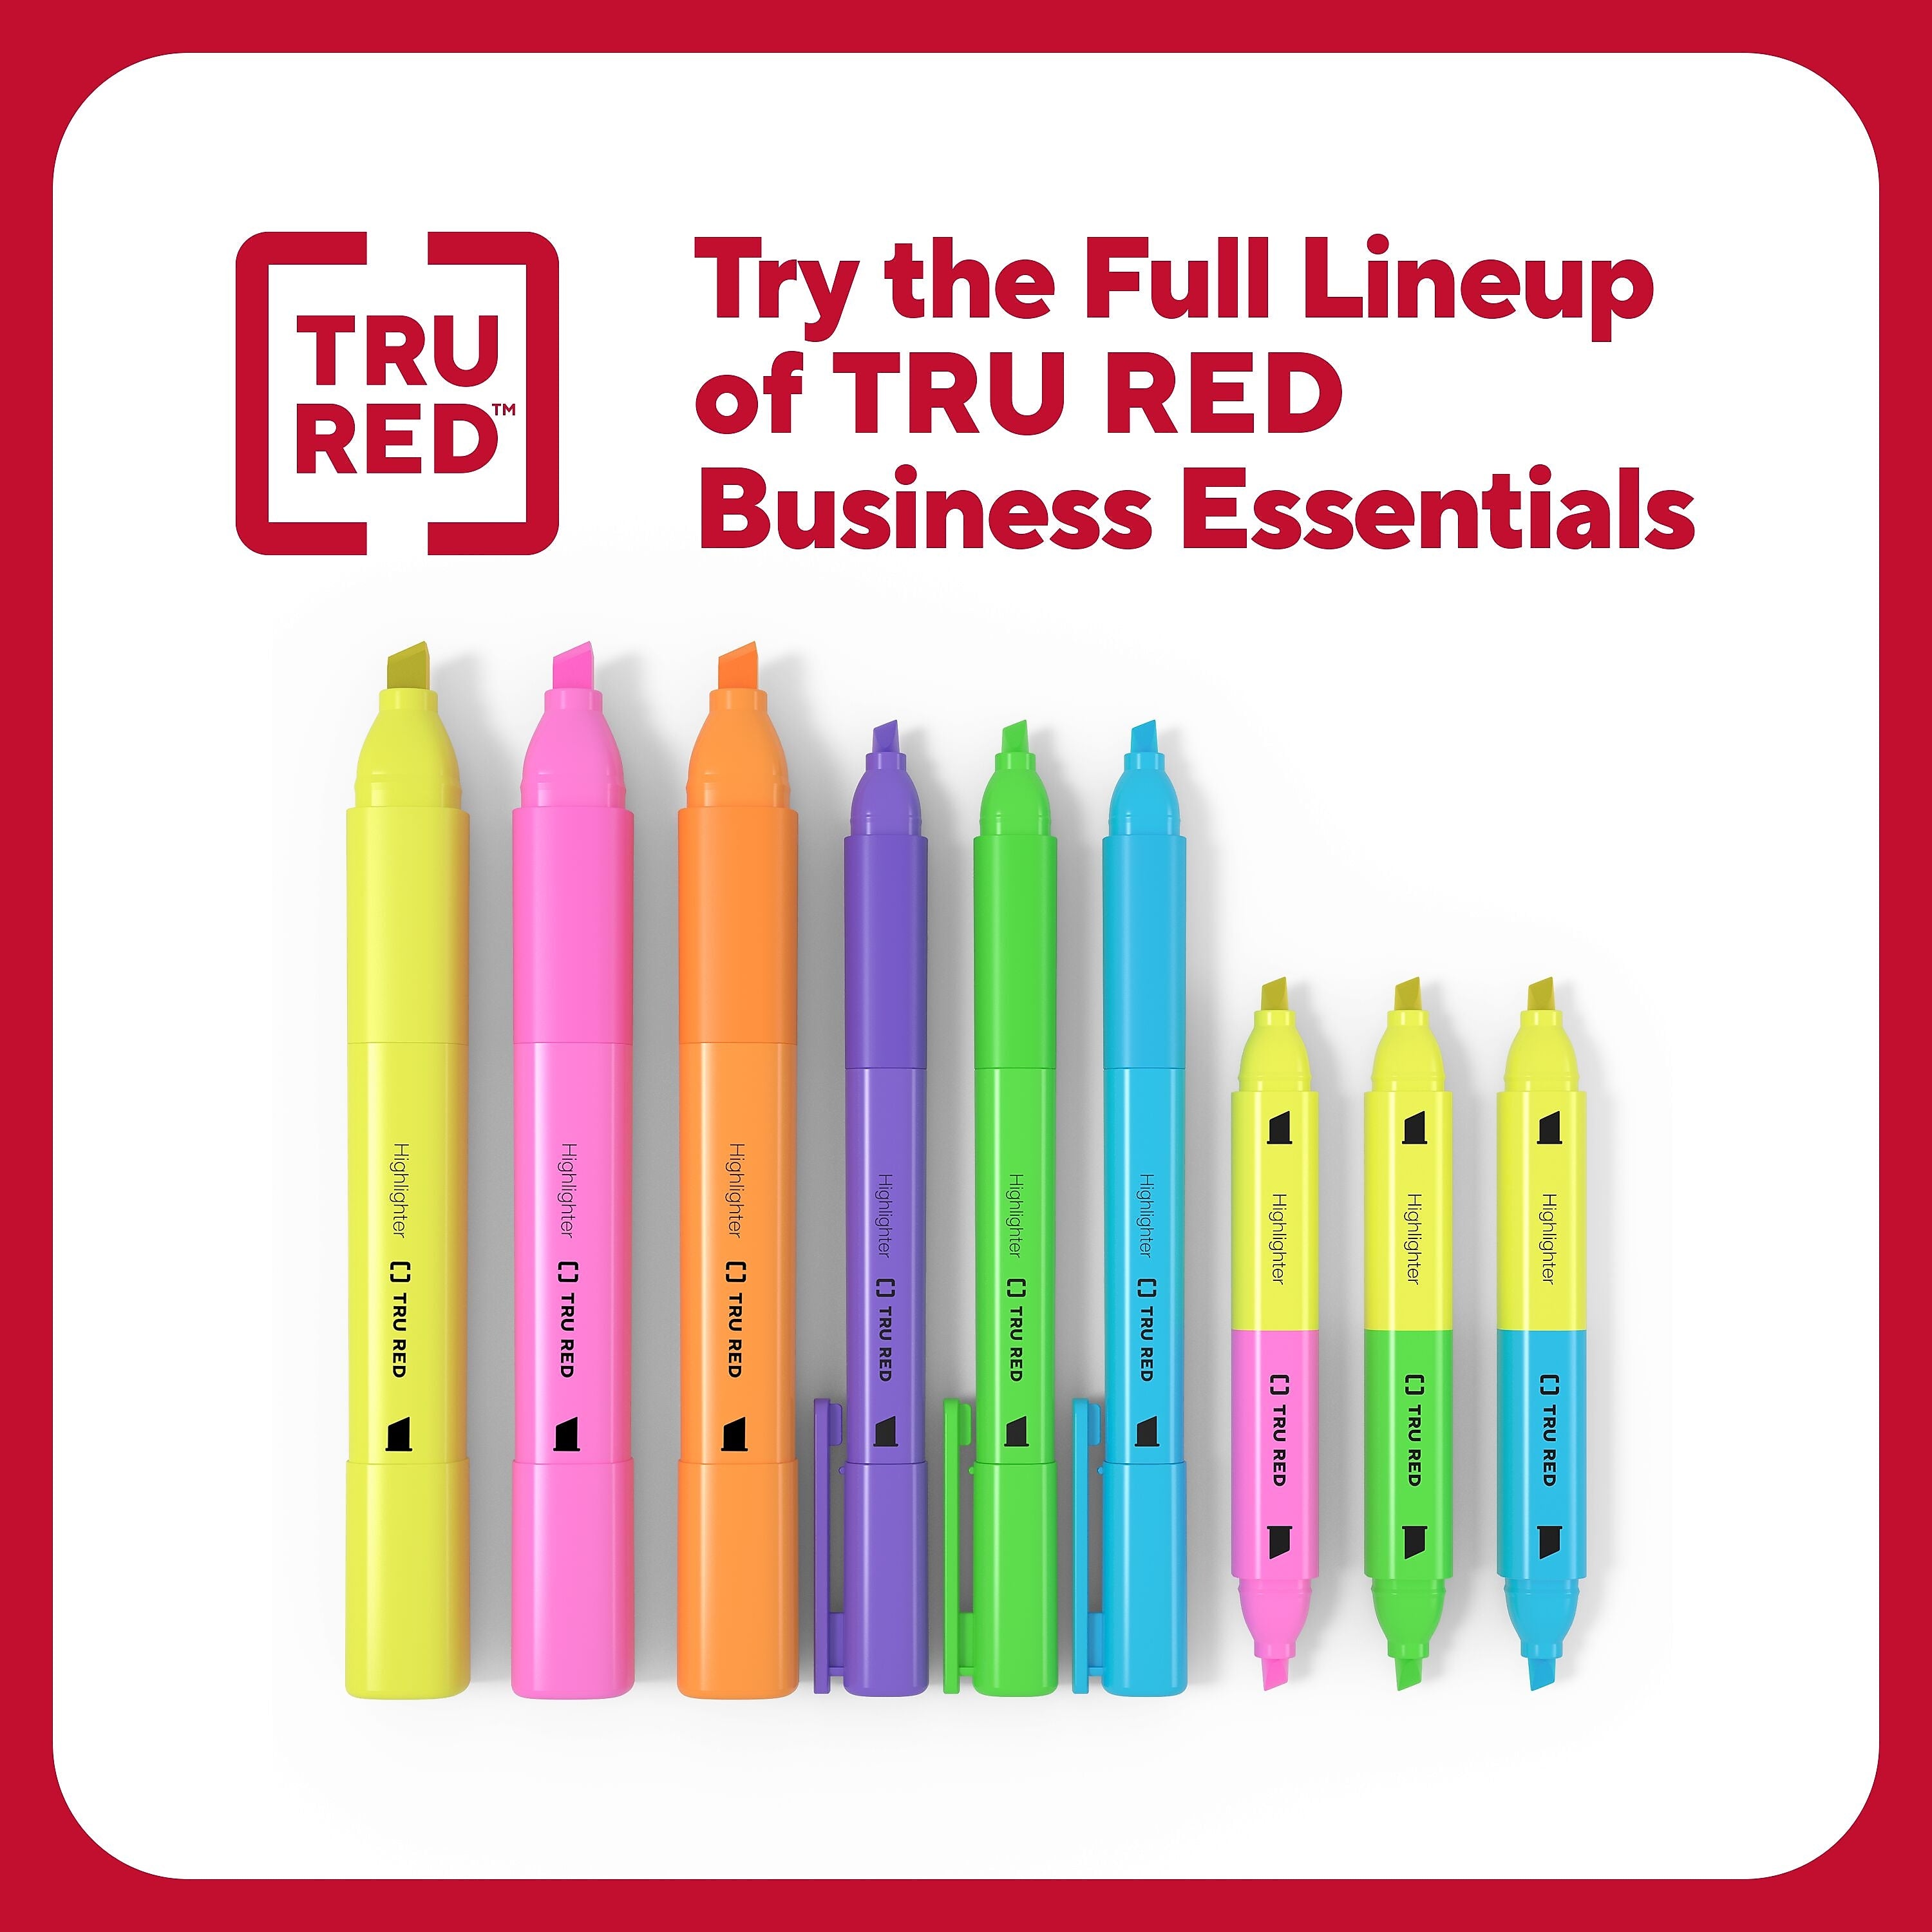 TRU RED™ Pocket Stick Highlighter with Grip, Chisel Tip, Yellow, 5/Pack